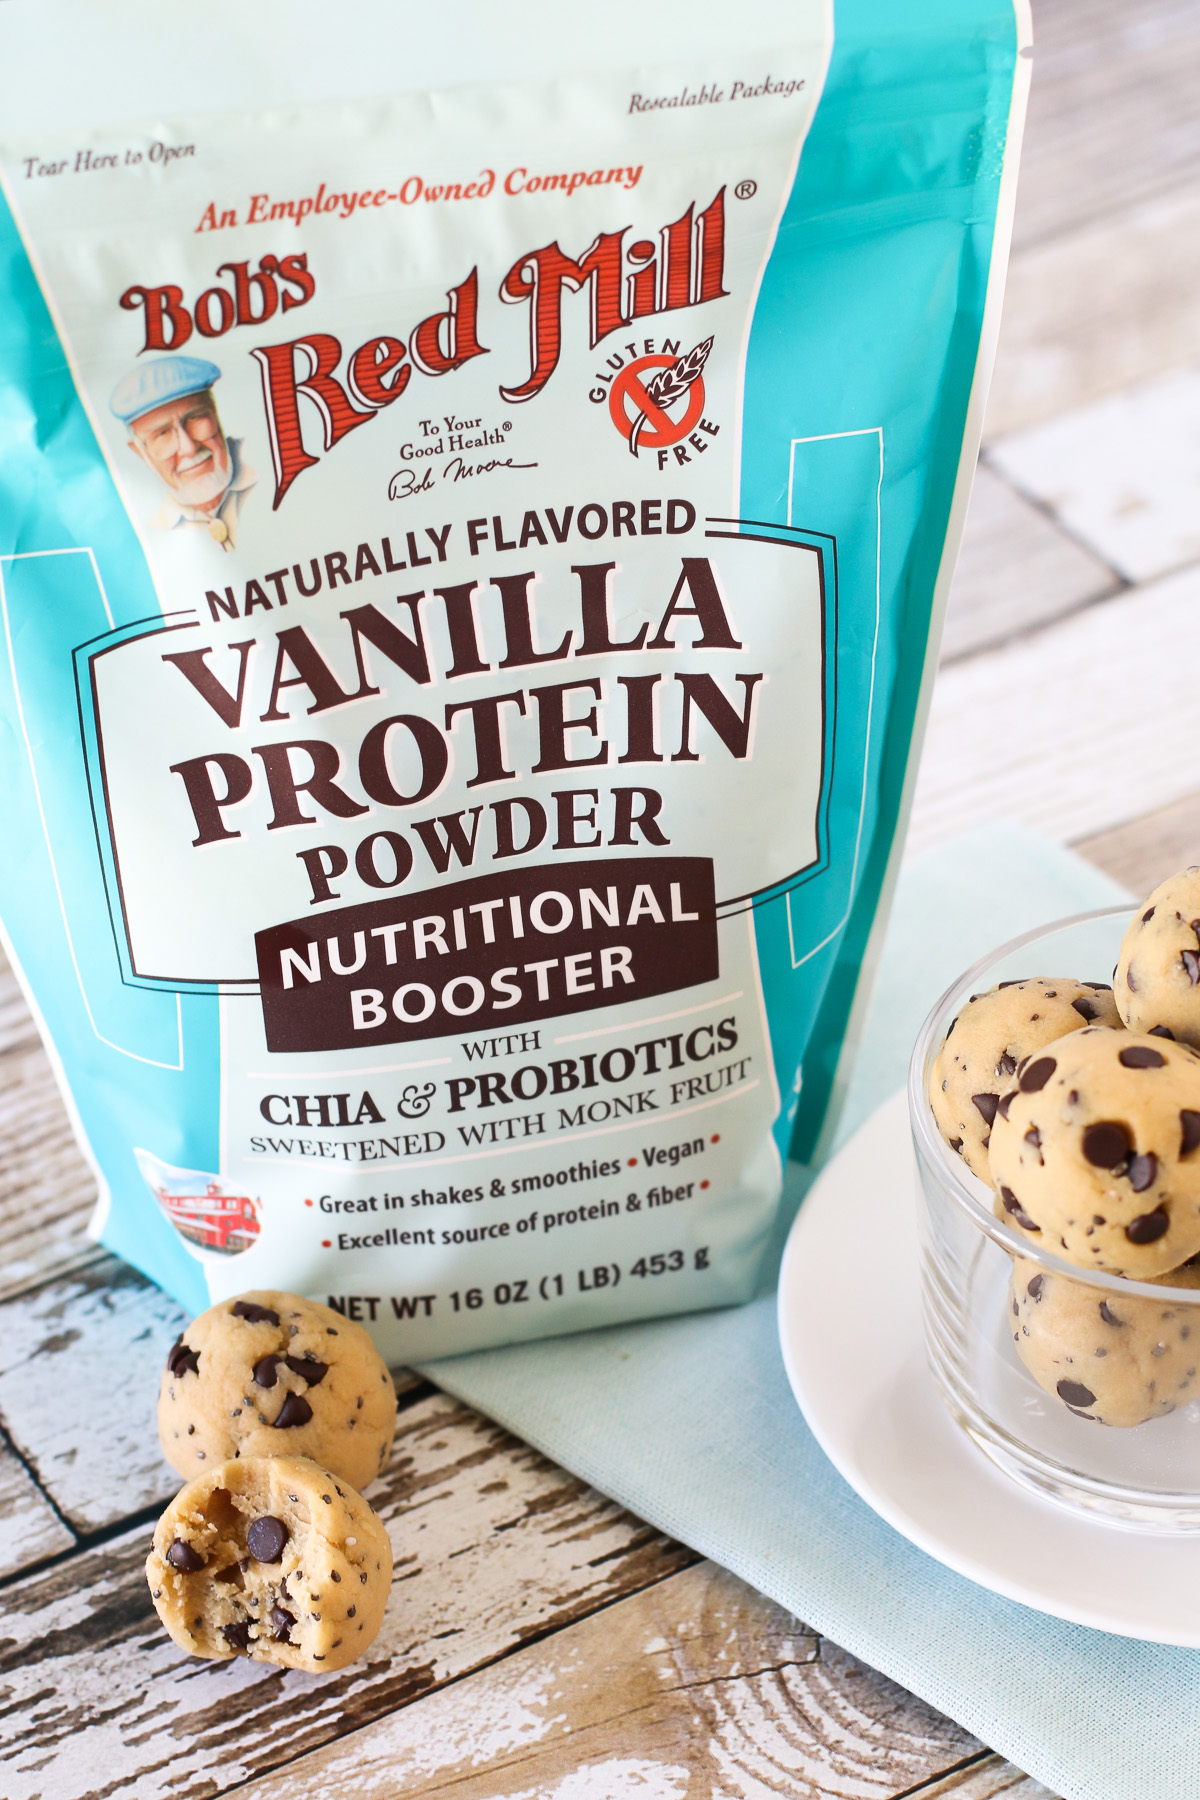 Chocolate Chip Cookie Dough Protein Bites. Made with Bob’s Red Mill vanilla protein powder, these no-bake protein bites tastes just like chocolate chip cookie dough!